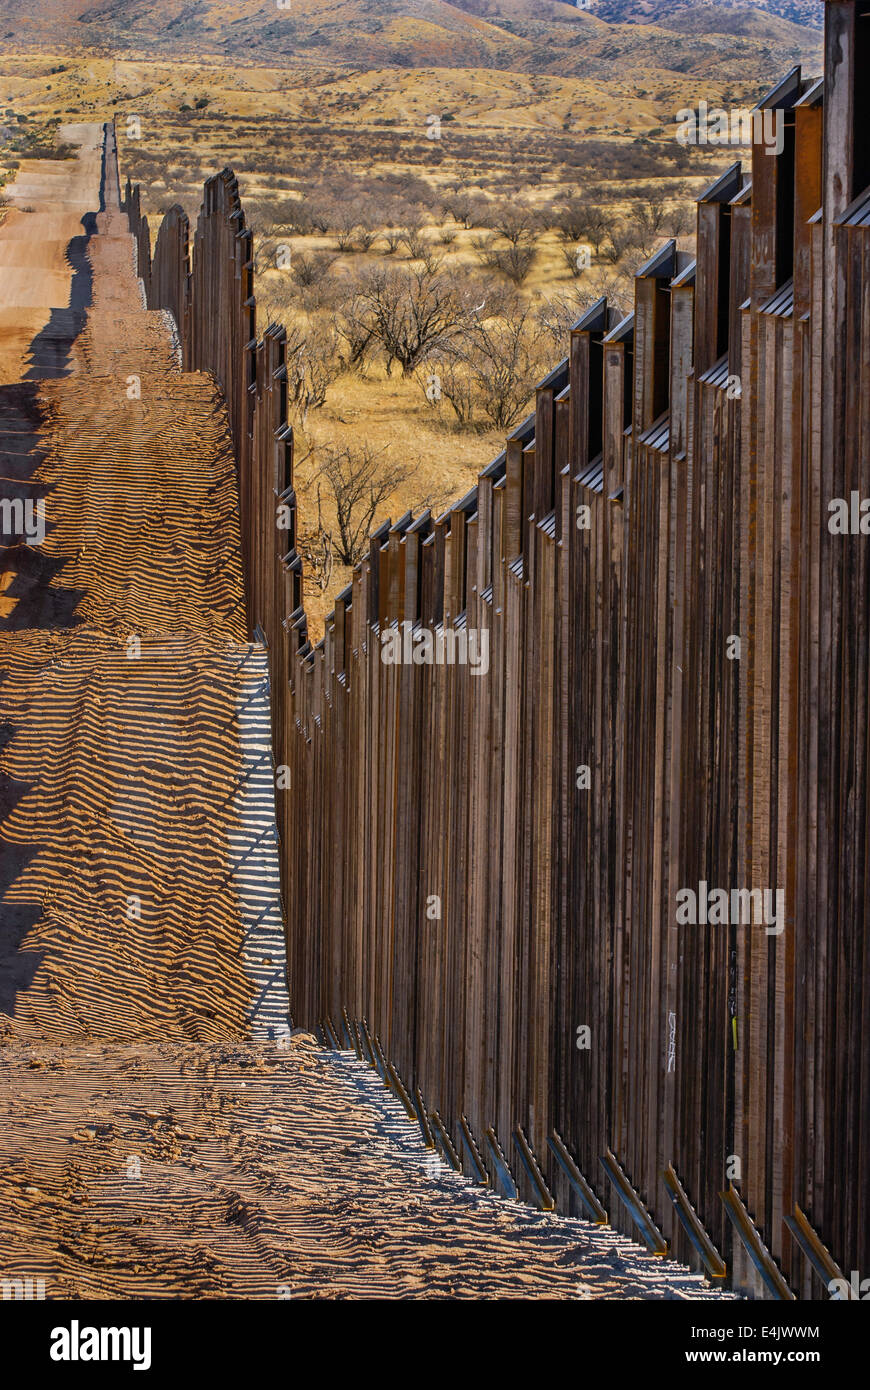 Massive 16 foot tall US border fence on border with Mexico,  6 miles east of Nogales Arizona, USA, looking east from US side Stock Photo